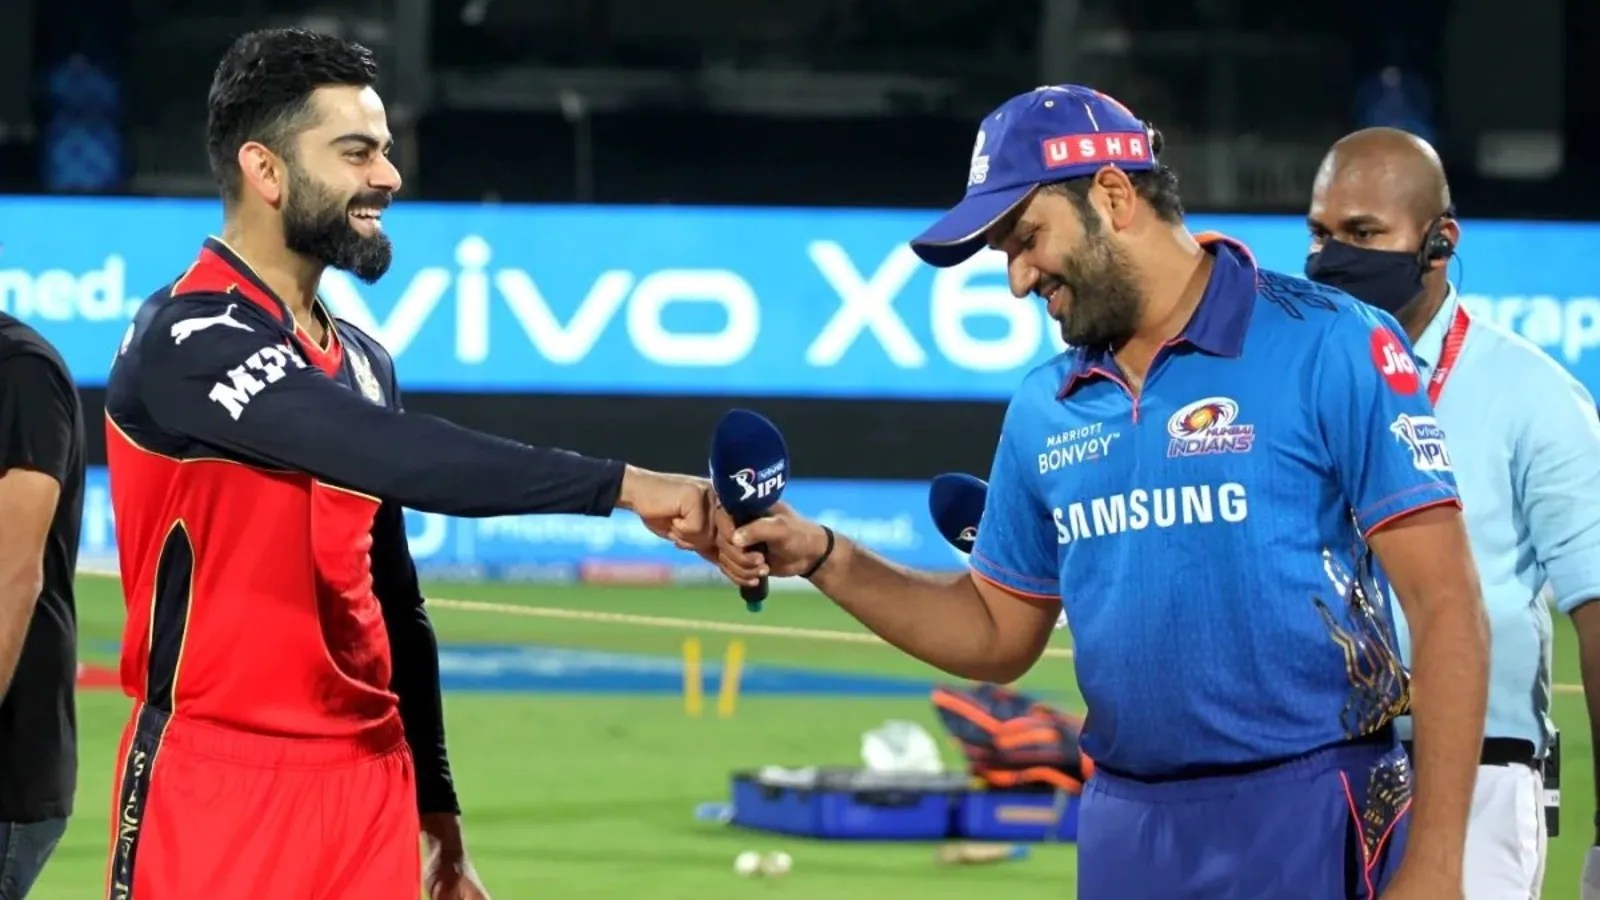  Rohit Sharma 'doubt if players will take breaks during IPL’, India Skipper urges franchises, players to take care of their bodies, IPL 16, Virat Kohli